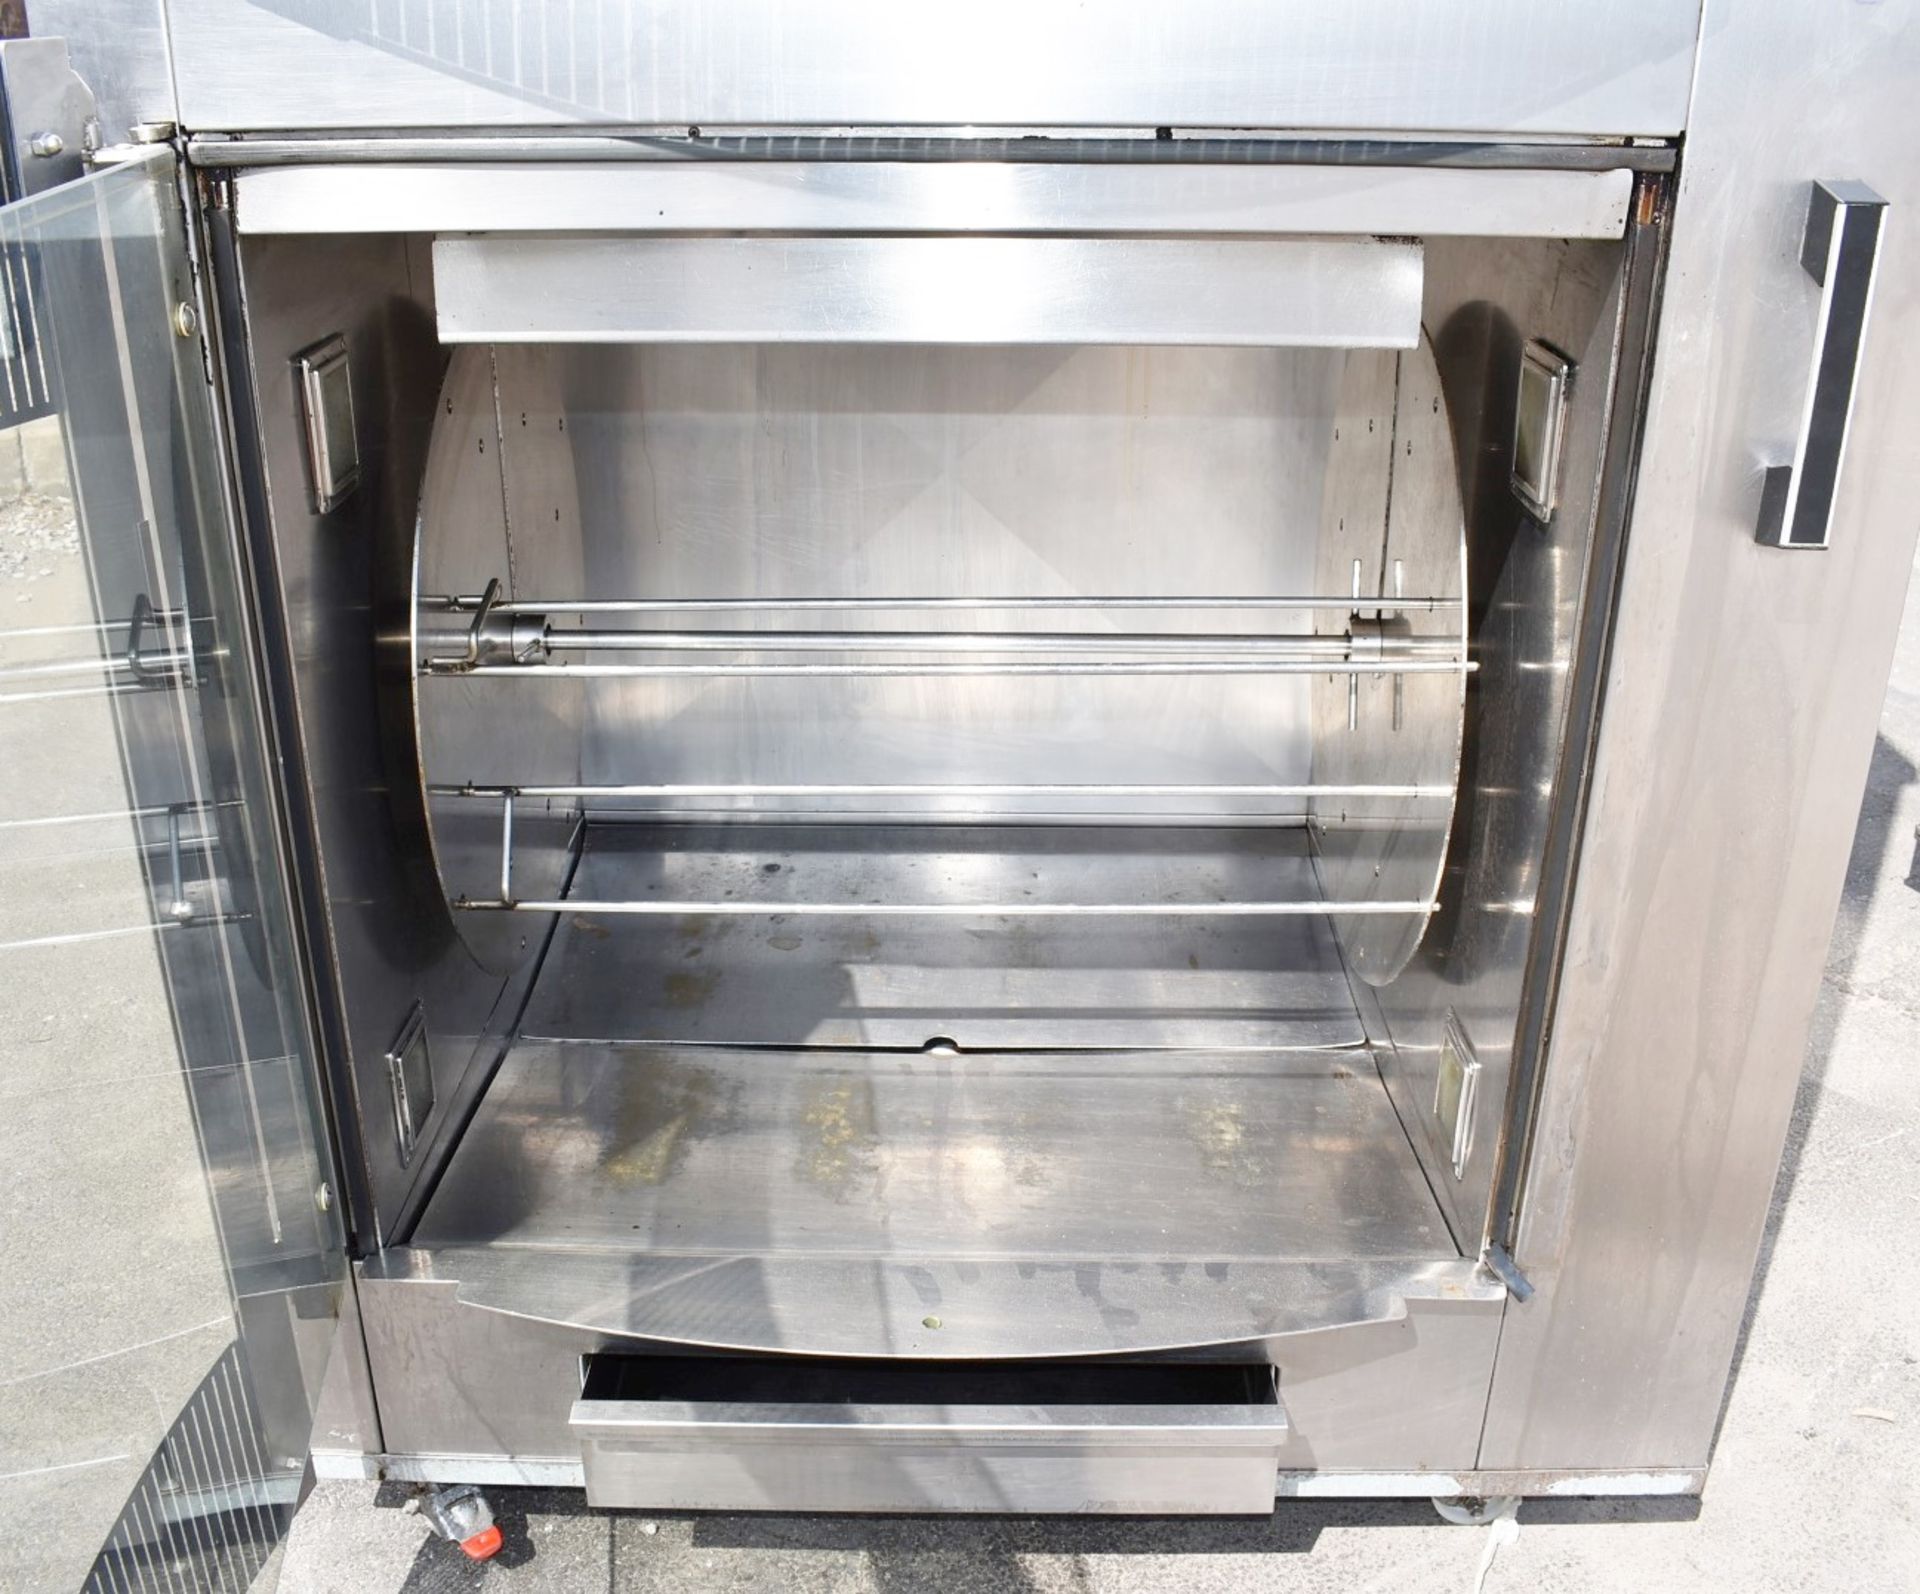 1 x BKI BBQ King Commercial Double Rotisserie Chicken Oven With Stand - Type VGUK16 - 3 Phase - Image 10 of 21